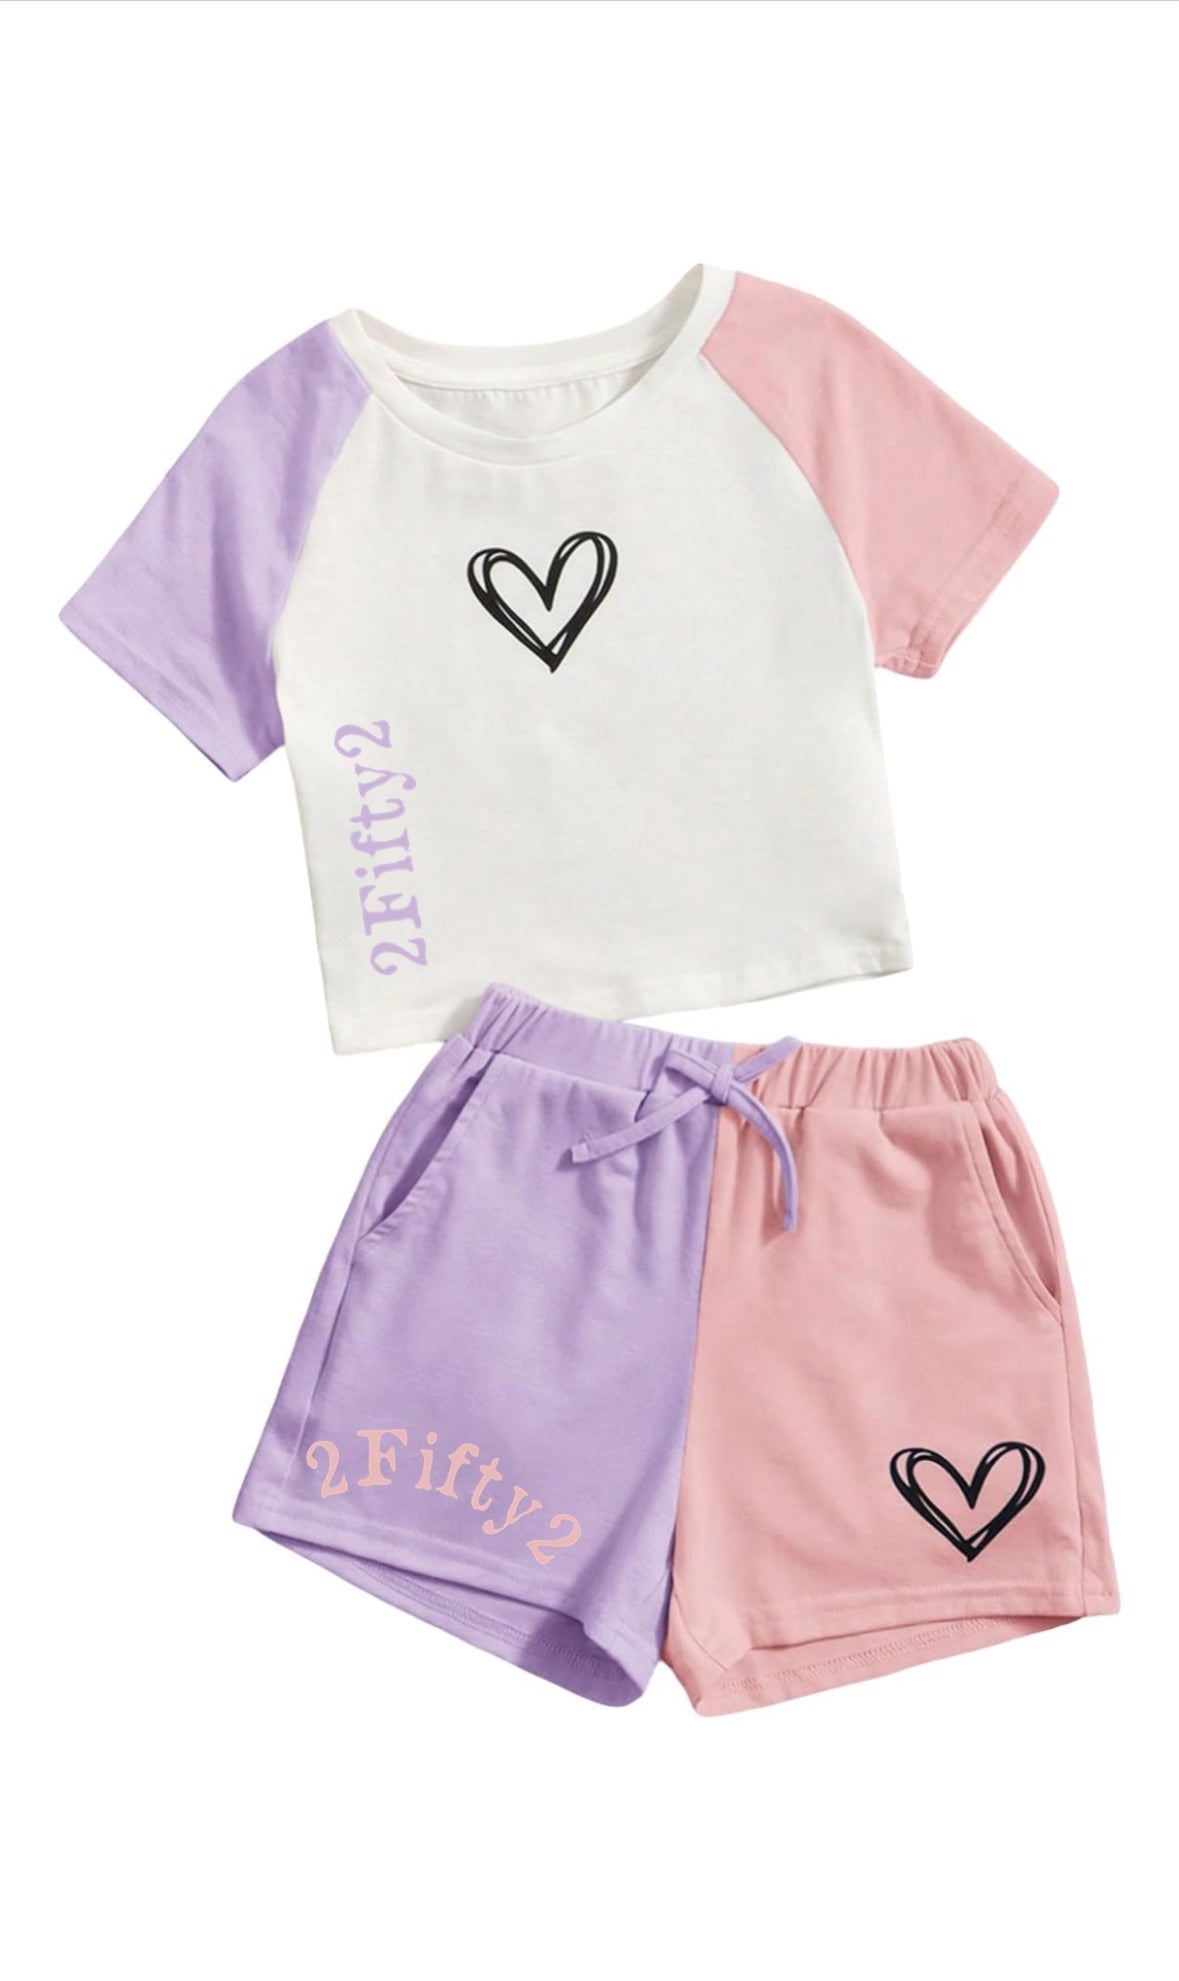 Girls 2 piece color-block short set by the 2fifty2 brand